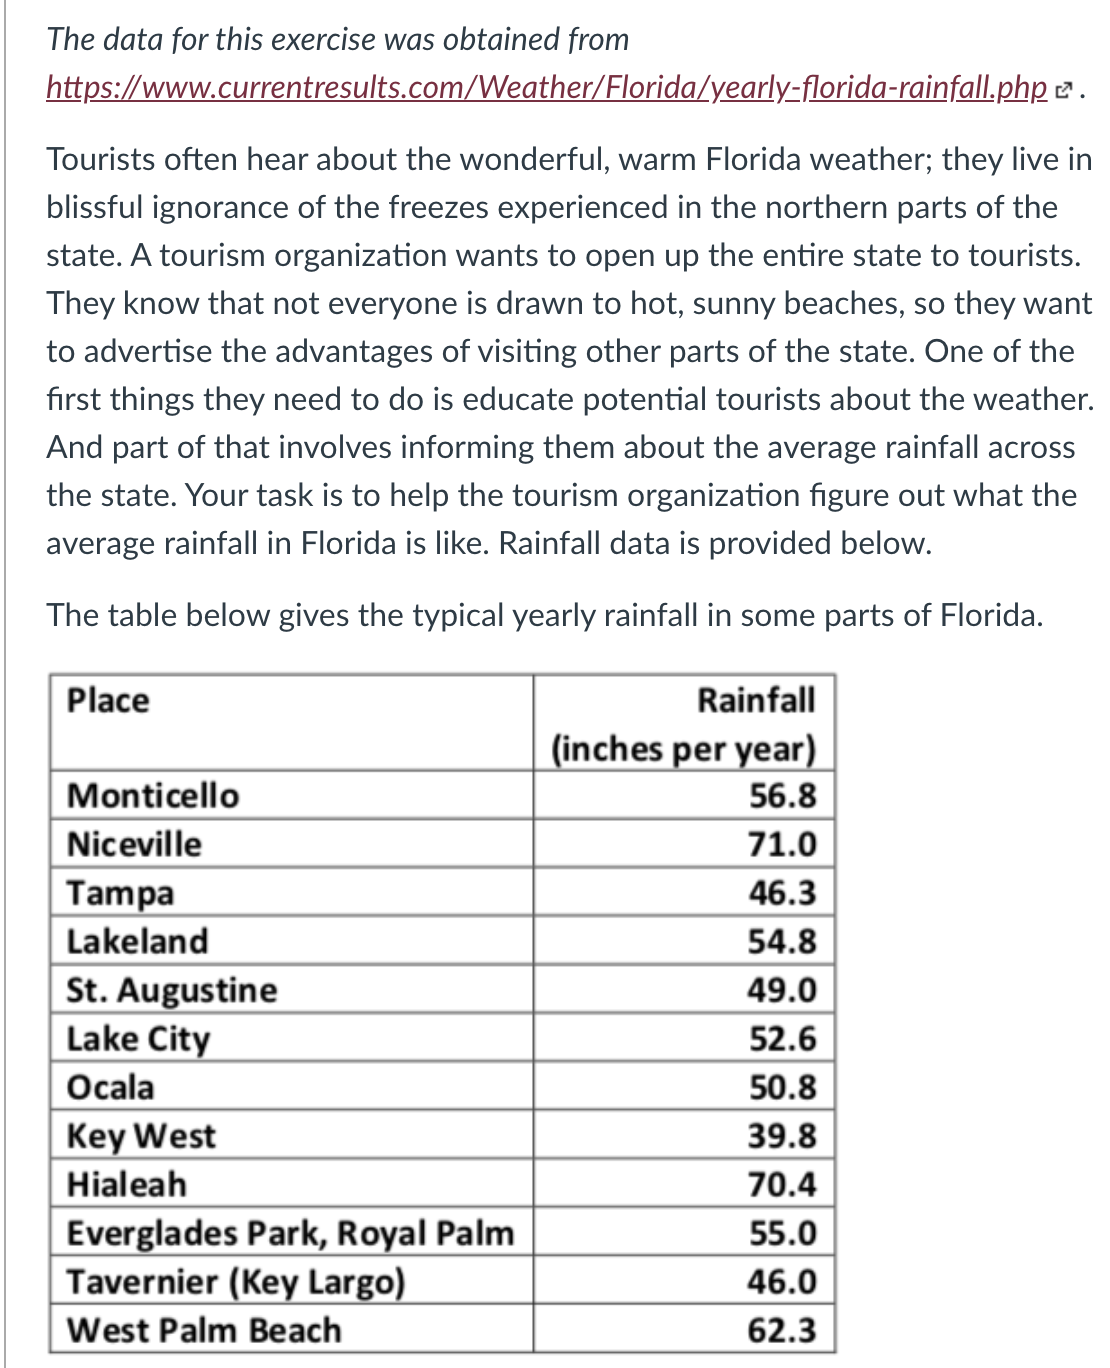 The data for this exercise was obtained from
https://www.currentresults.com/Weather/Florida/yearly-florida-rainfall.php 2 .
Tourists often hear about the wonderful, warm Florida weather; they live in
blissful ignorance of the freezes experienced in the northern parts of the
state. A tourism organization wants to open up the entire state to tourists.
They know that not everyone is drawn to hot, sunny beaches, so they want
to advertise the advantages of visiting other parts of the state. One of the
first things they need to do is educate potential tourists about the weather.
And part of that involves informing them about the average rainfall across
the state. Your task is to help the tourism organization figure out what the
average rainfall in Florida is like. Rainfall data is provided below.
The table below gives the typical yearly rainfall in some parts of Florida.
Place
Rainfall
(inches per year)
Monticello
56.8
Niceville
71.0
Tampa
46.3
Lakeland
54.8
St. Augustine
Lake City
49.0
52.6
50.8
Ocala
Key West
39.8
Hialeah
70.4
Everglades Park, Royal Palm
Tavernier (Key Largo)
55.0
46.0
West Palm Beach
62.3
